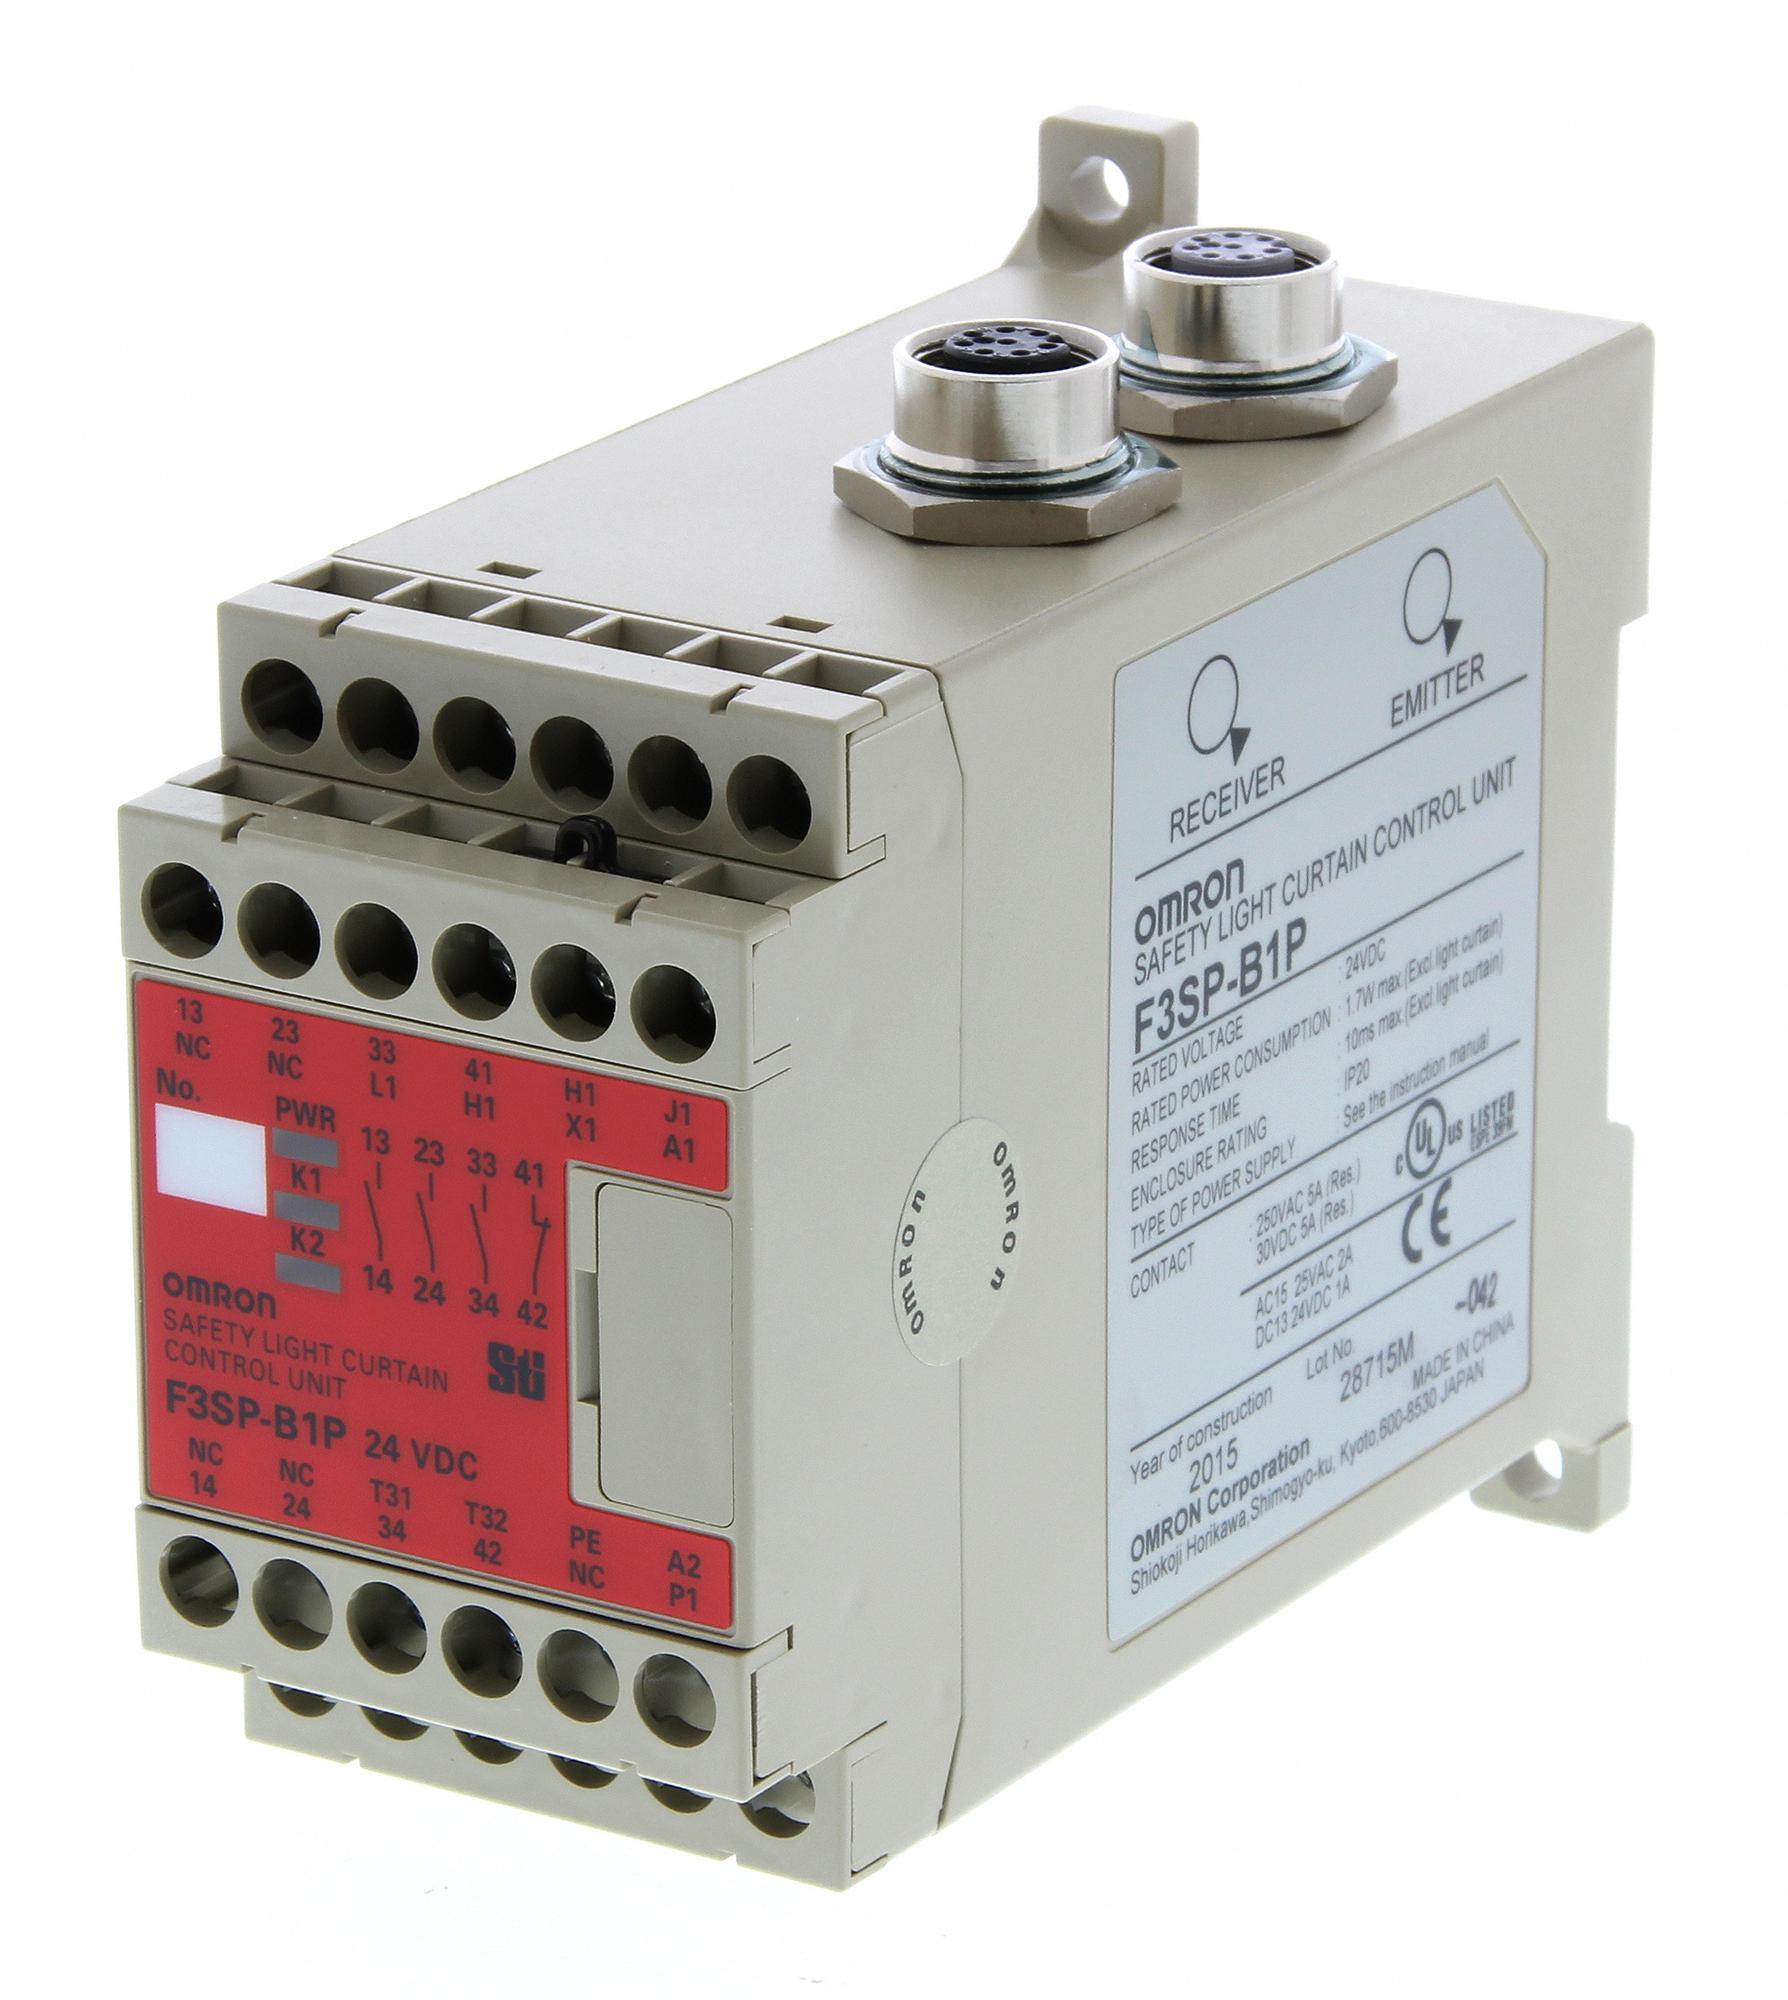 F3SP-B1P SAFETY RELAYS OMRON